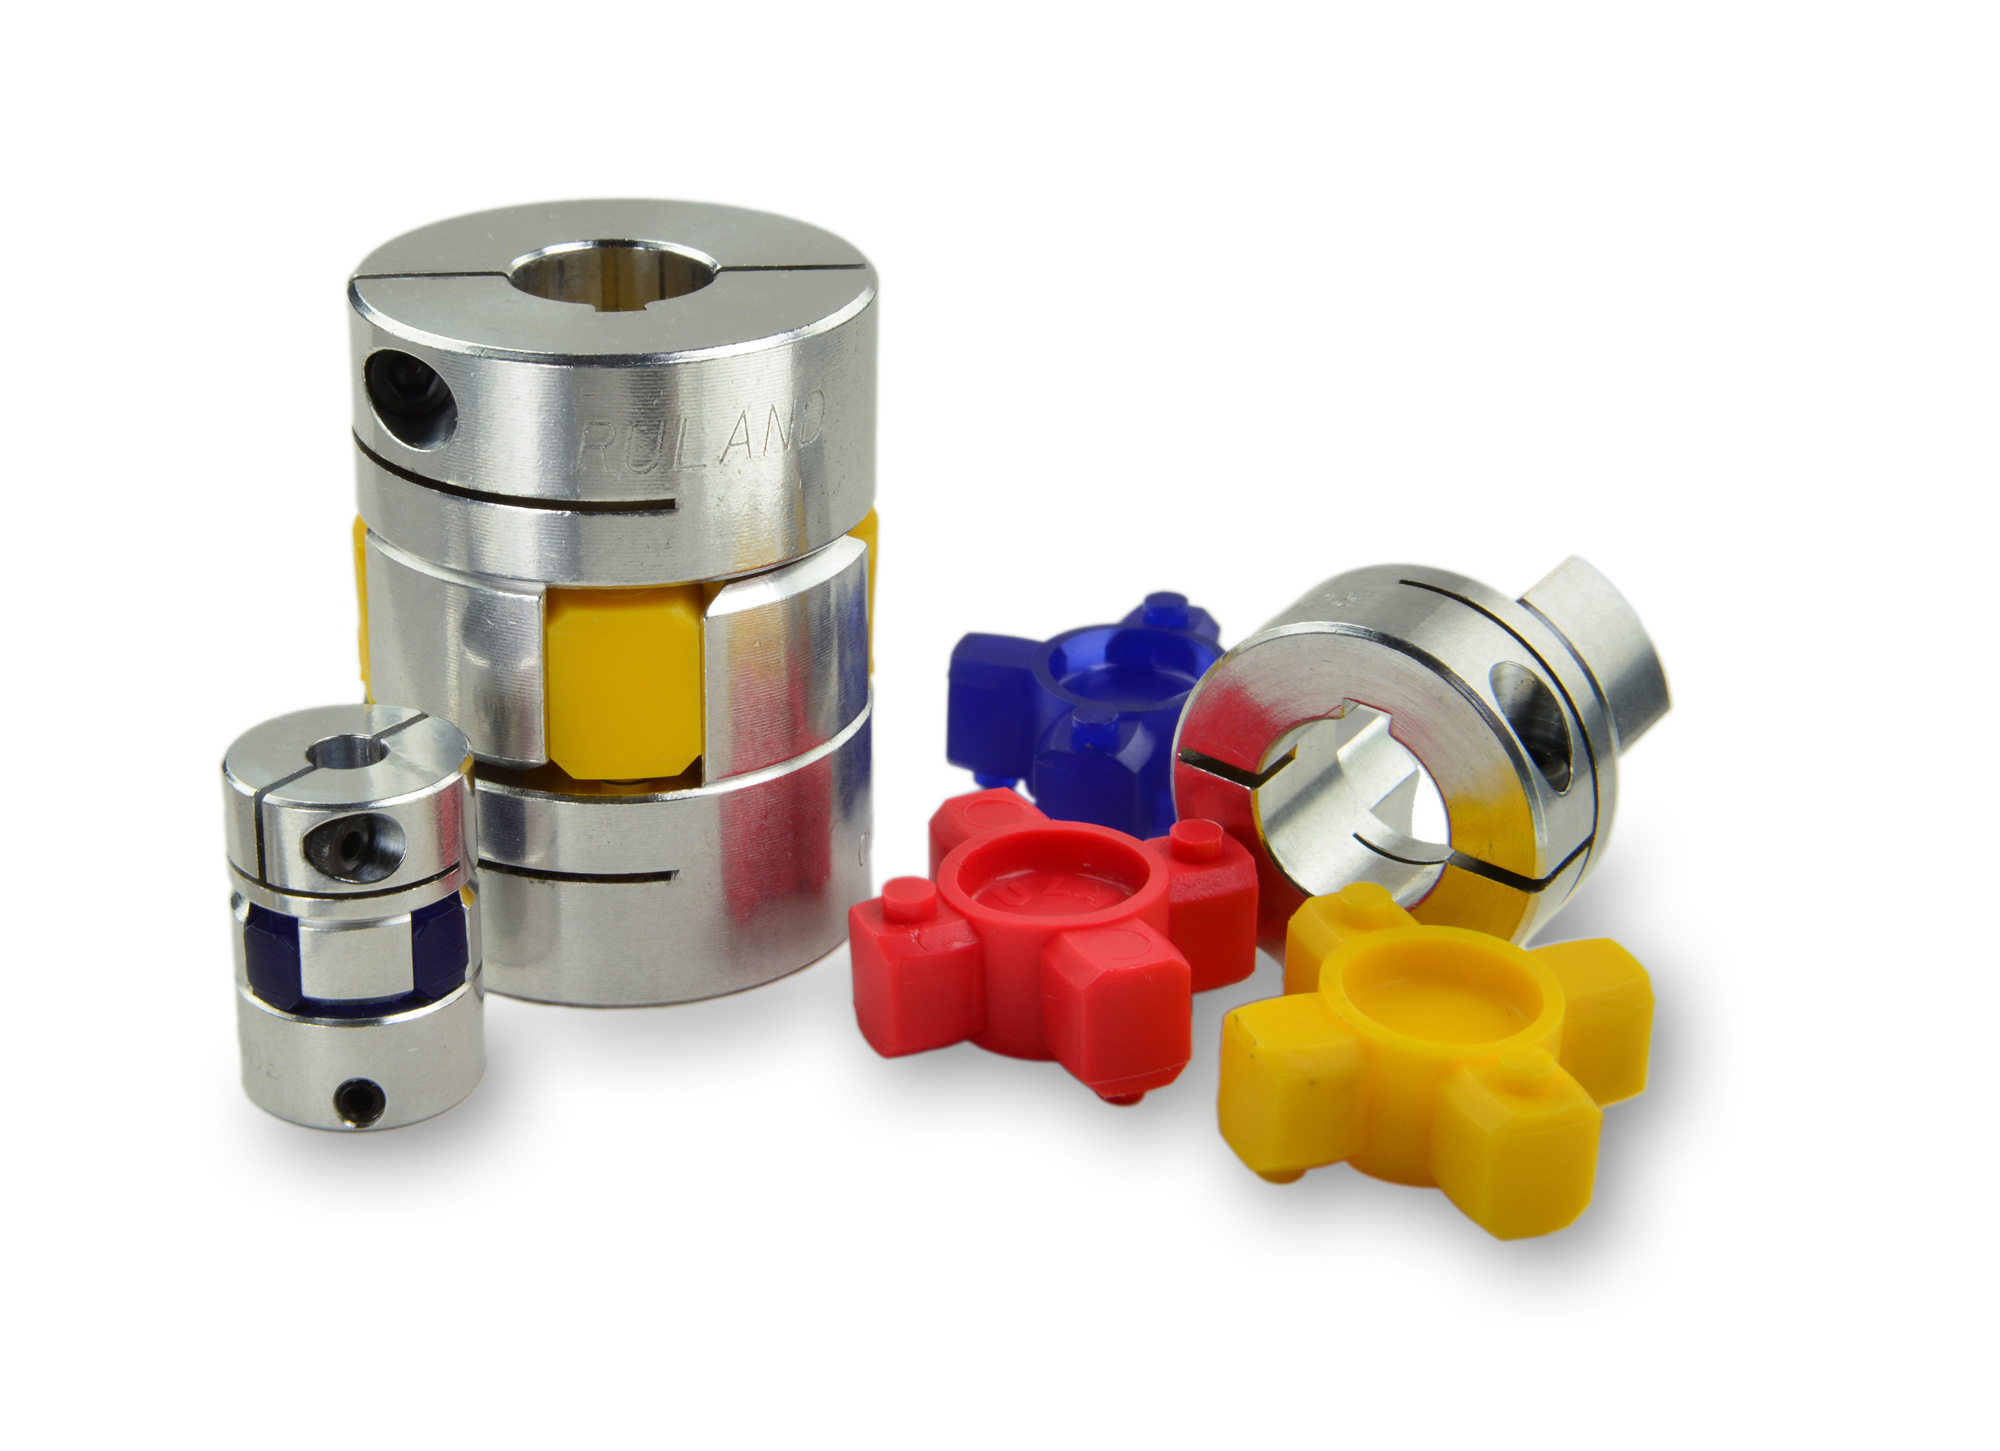 Ruland zero-backlash jaw couplings are commonly used in medical, semiconductor, test and measurement, and robotics, due to their ability to dampen impulse loads in start-stop applications